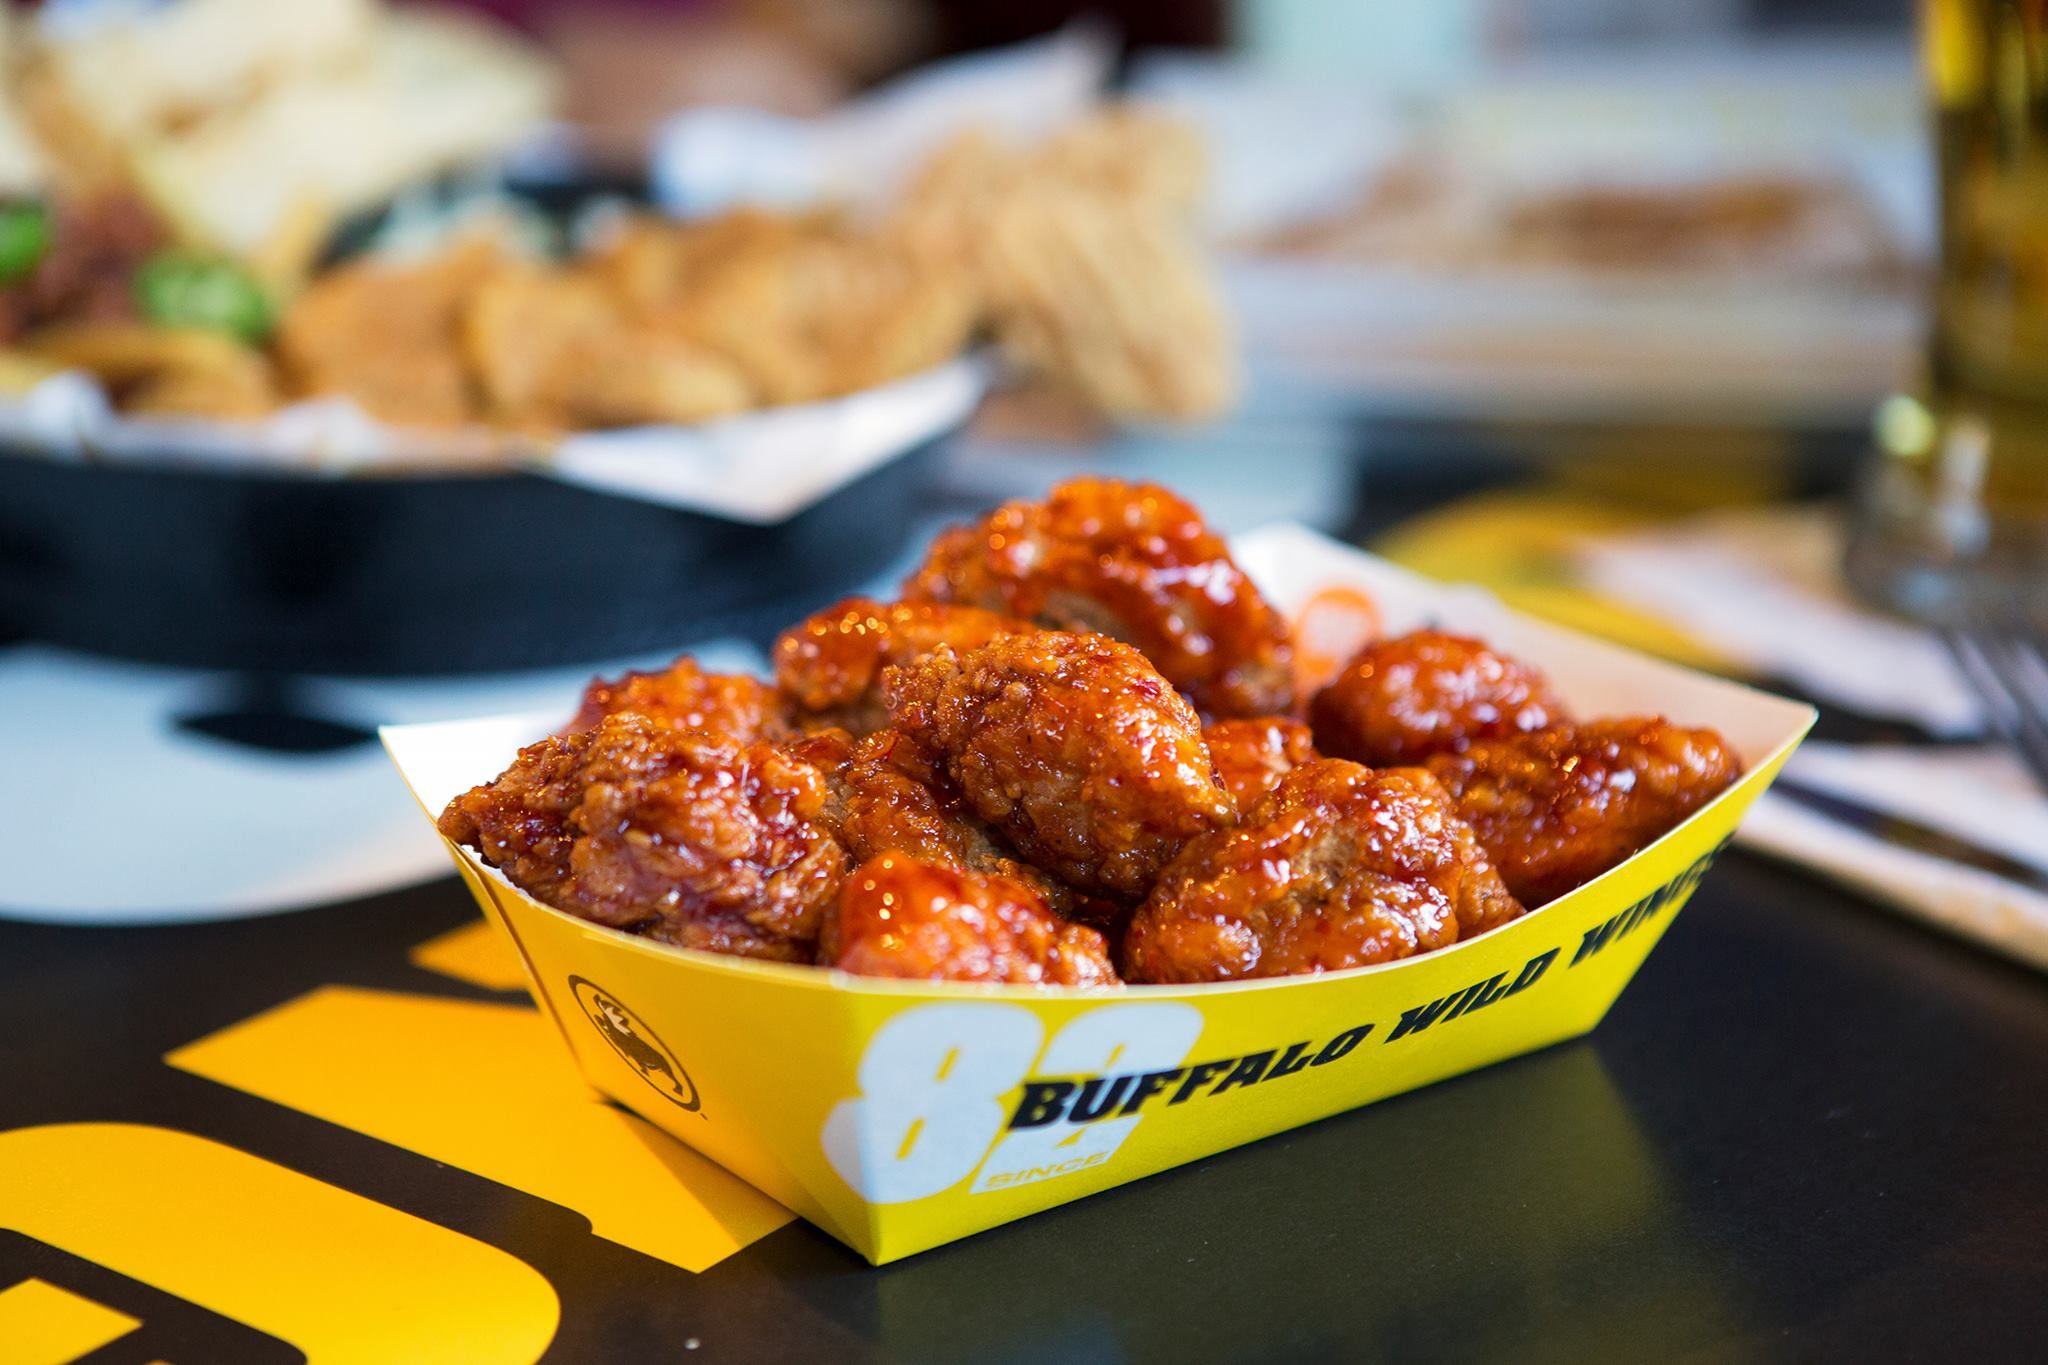 How to Play Buffalo Wild Wings Bracket Pick 'Em Game Buffalo Wings March Madness Game